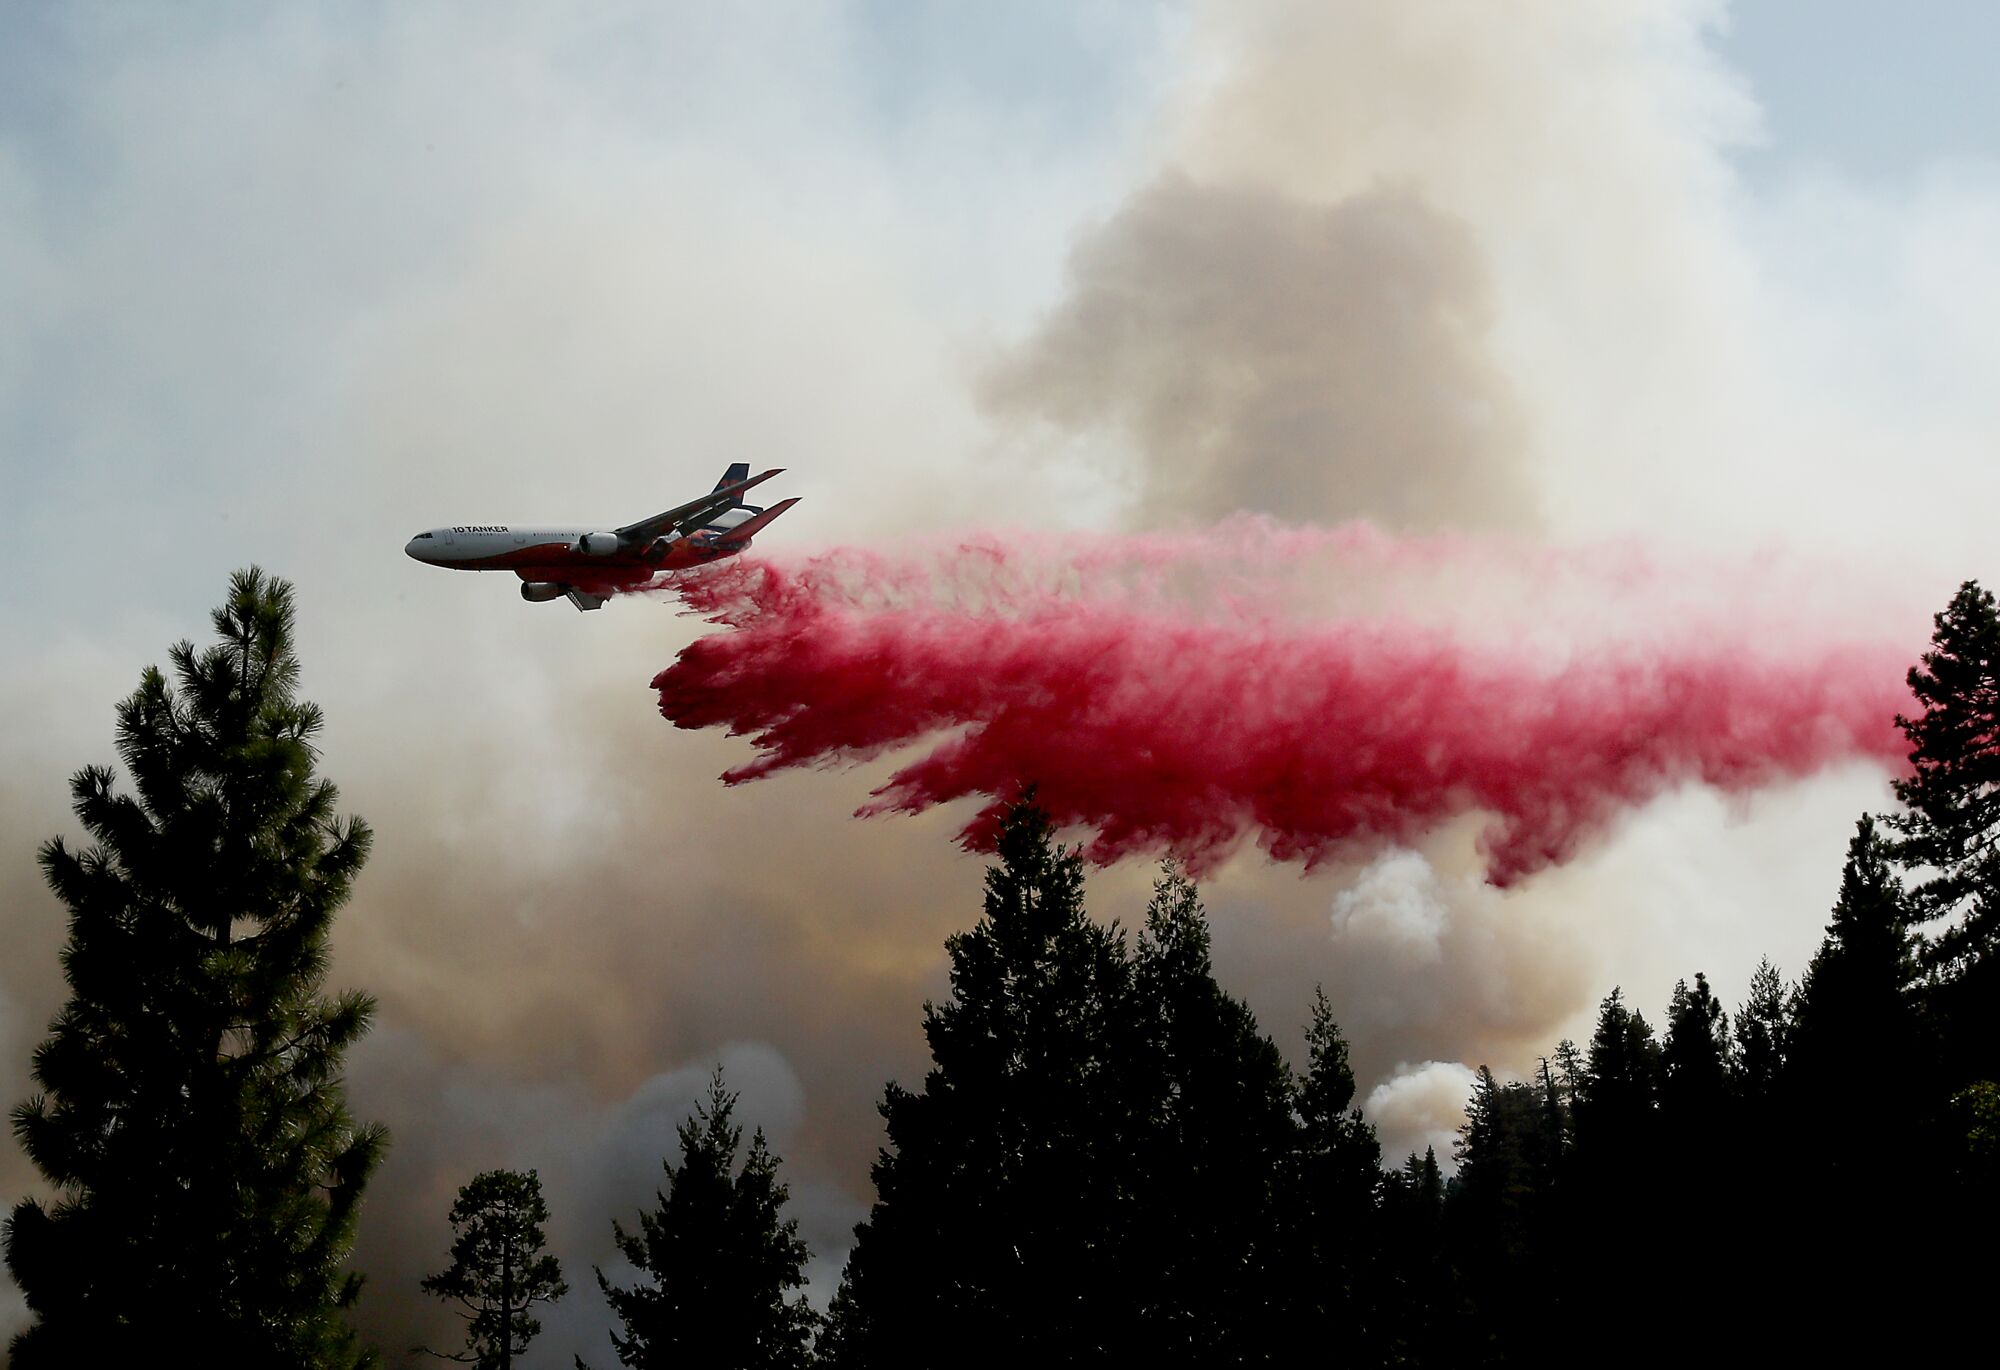 A plane drops red liquid over a burning forest.